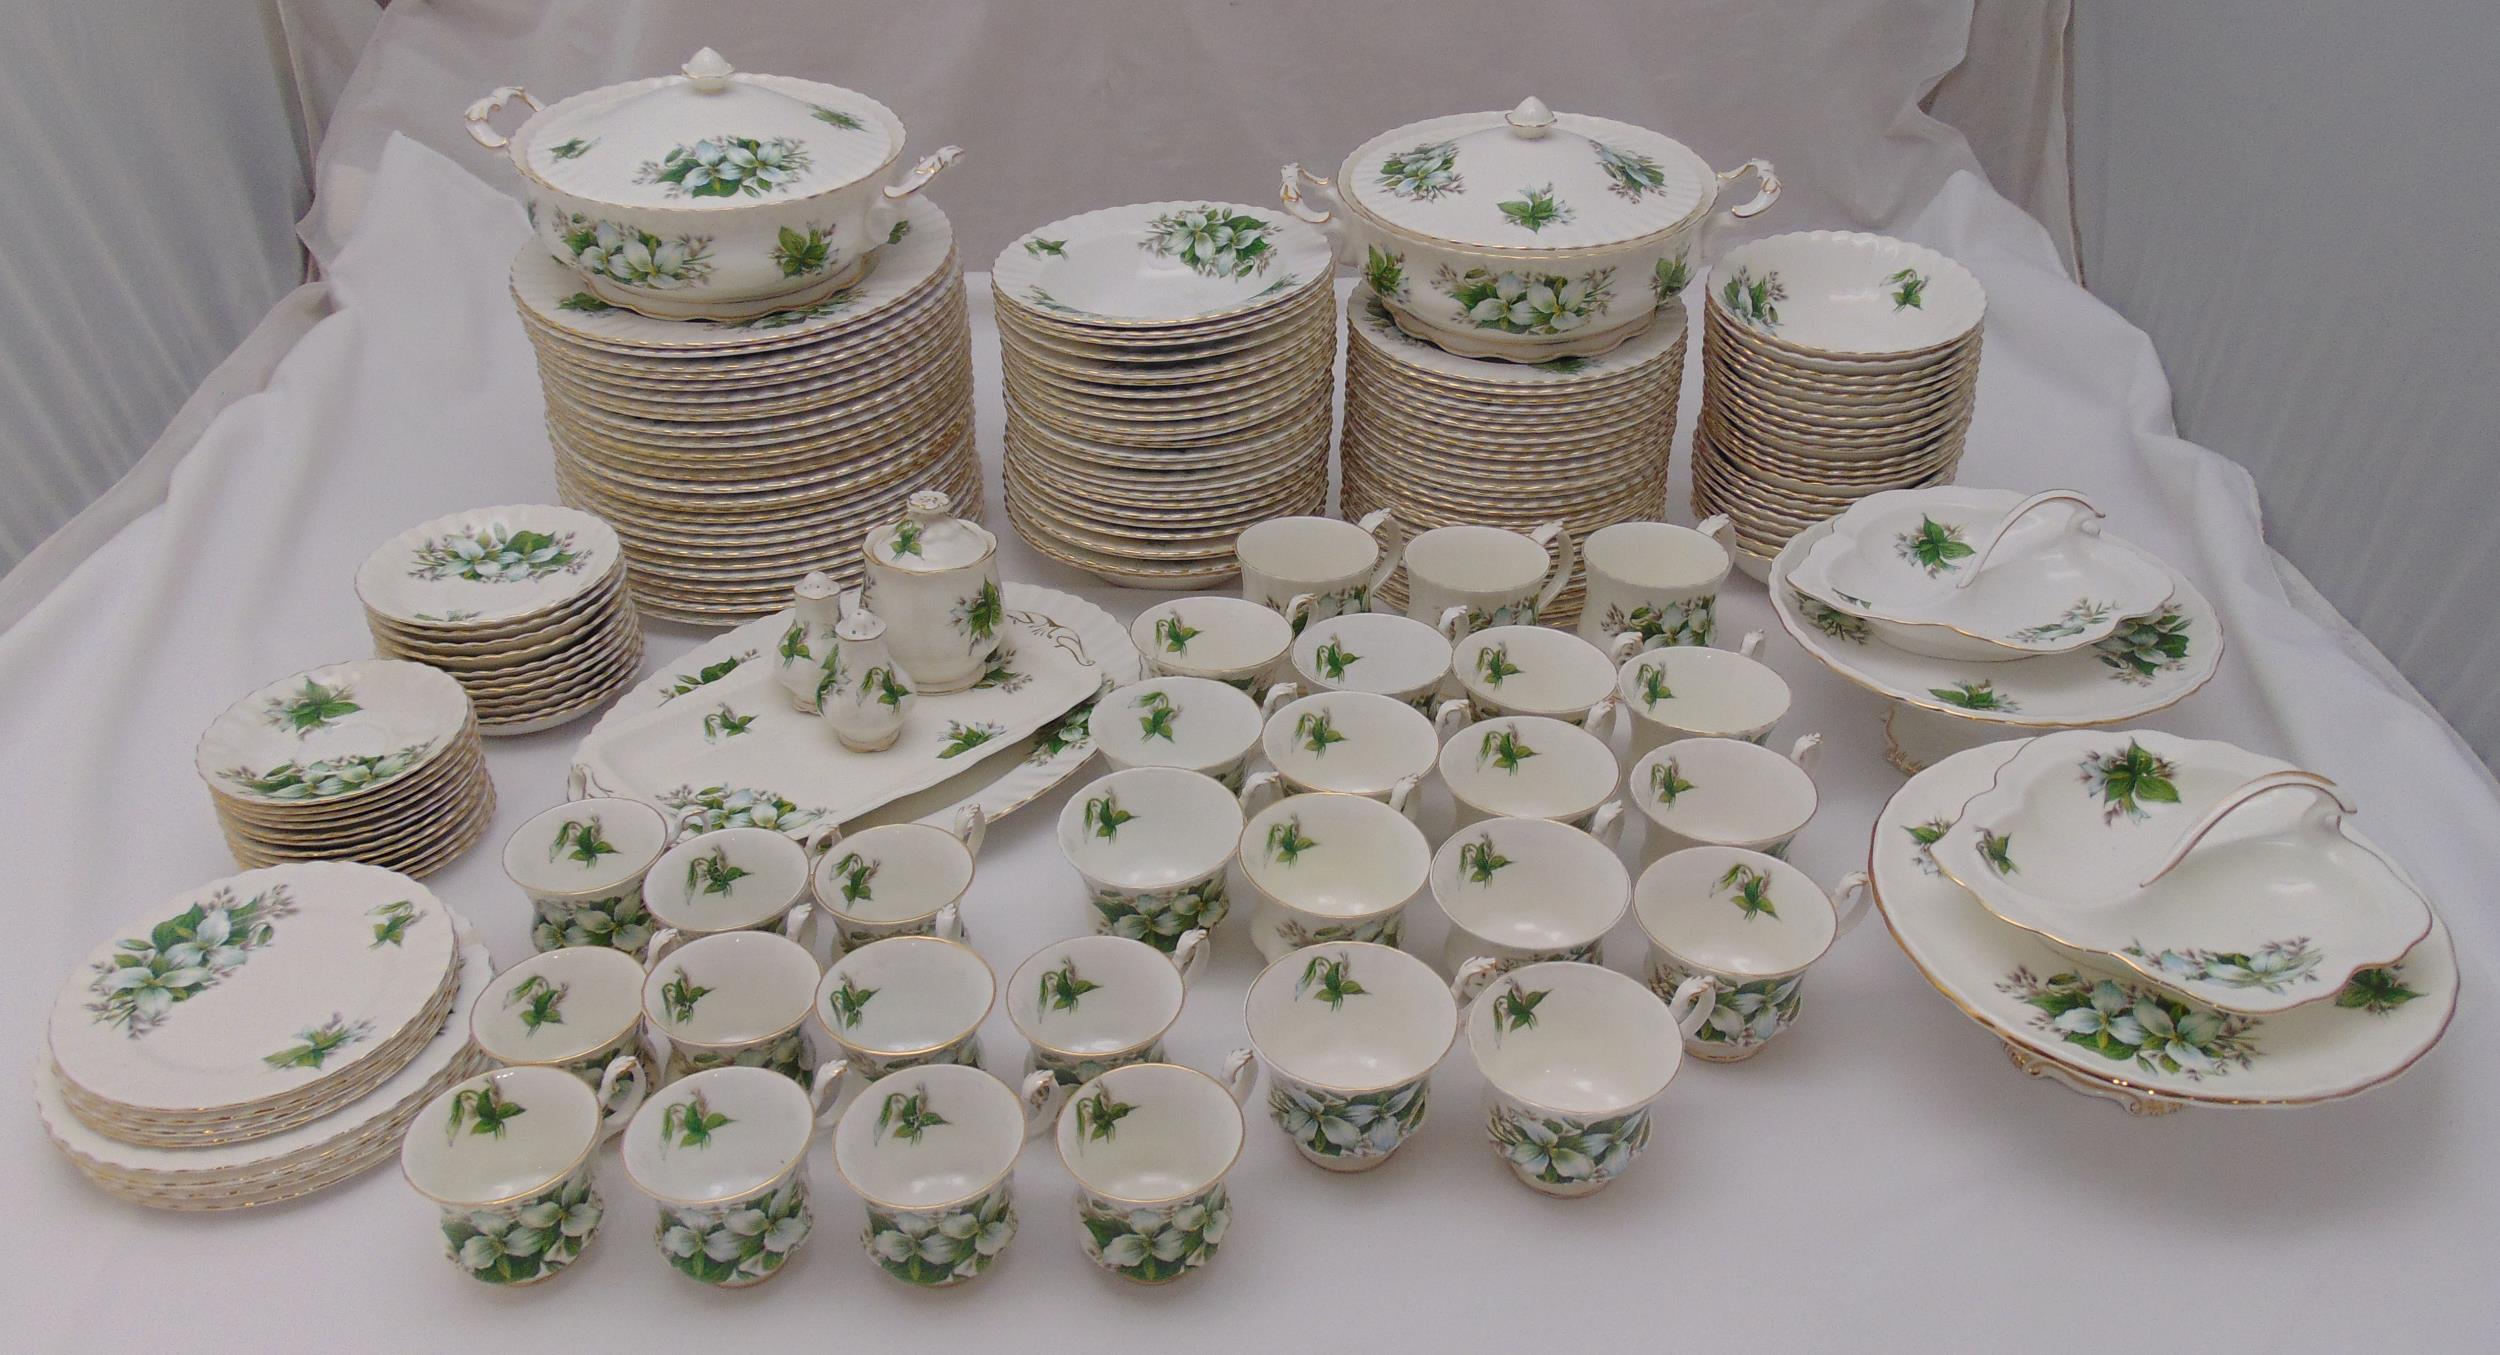 Royal Albert Trillium pattern dinner, tea and coffee service to include plates, bowls, cups and